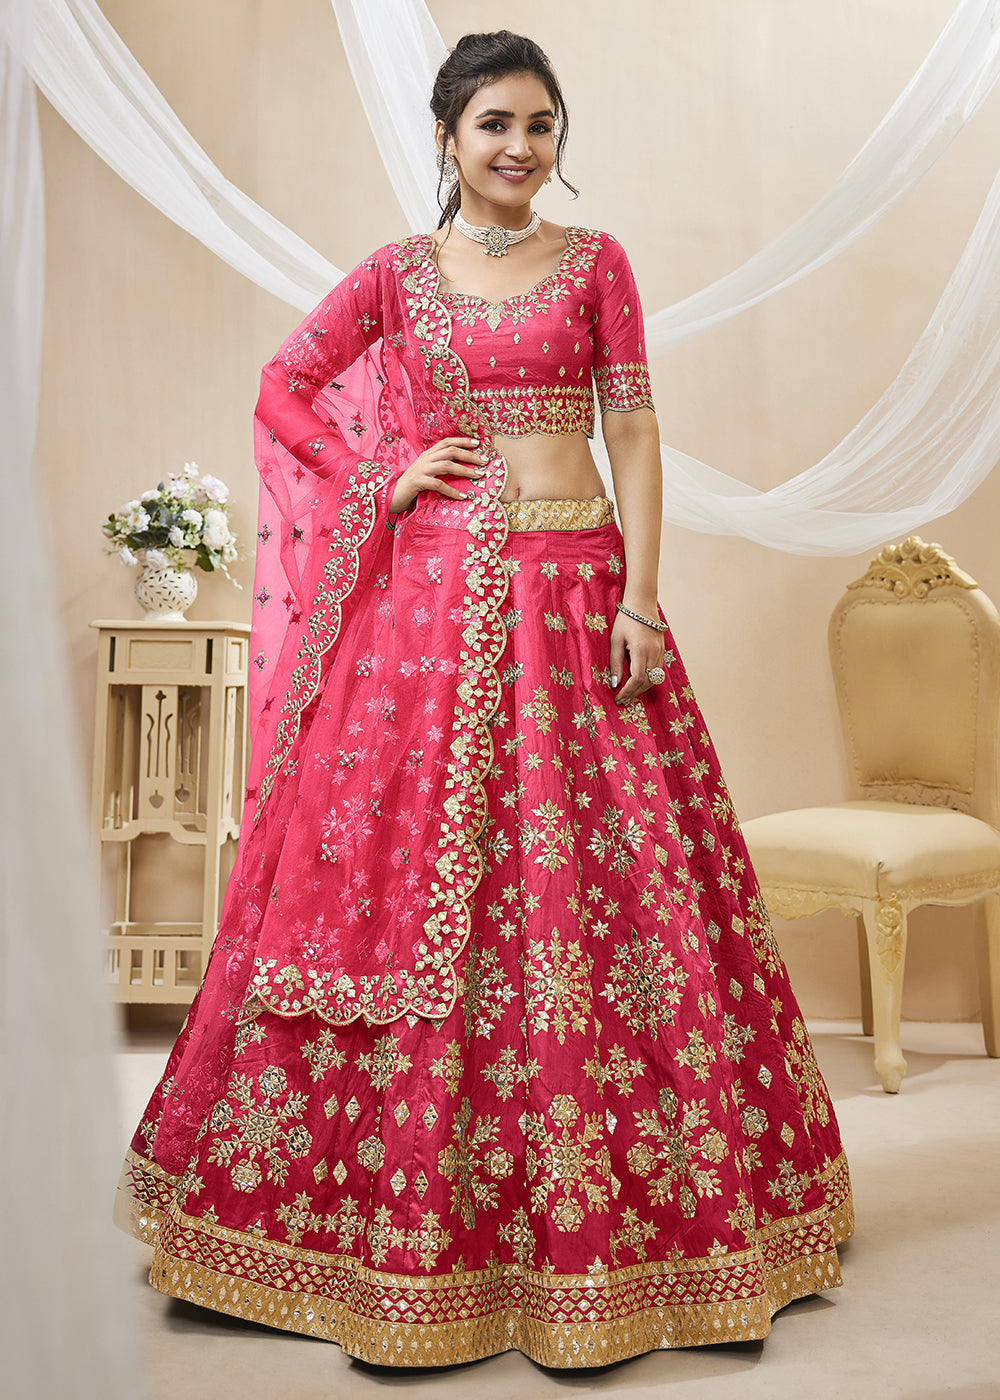 Buy Now Lovely Pink Art Silk Embroidered Reception Wear Lehenga Choli Online in USA, UK, Canada & Worldwide at Empress Clothing.